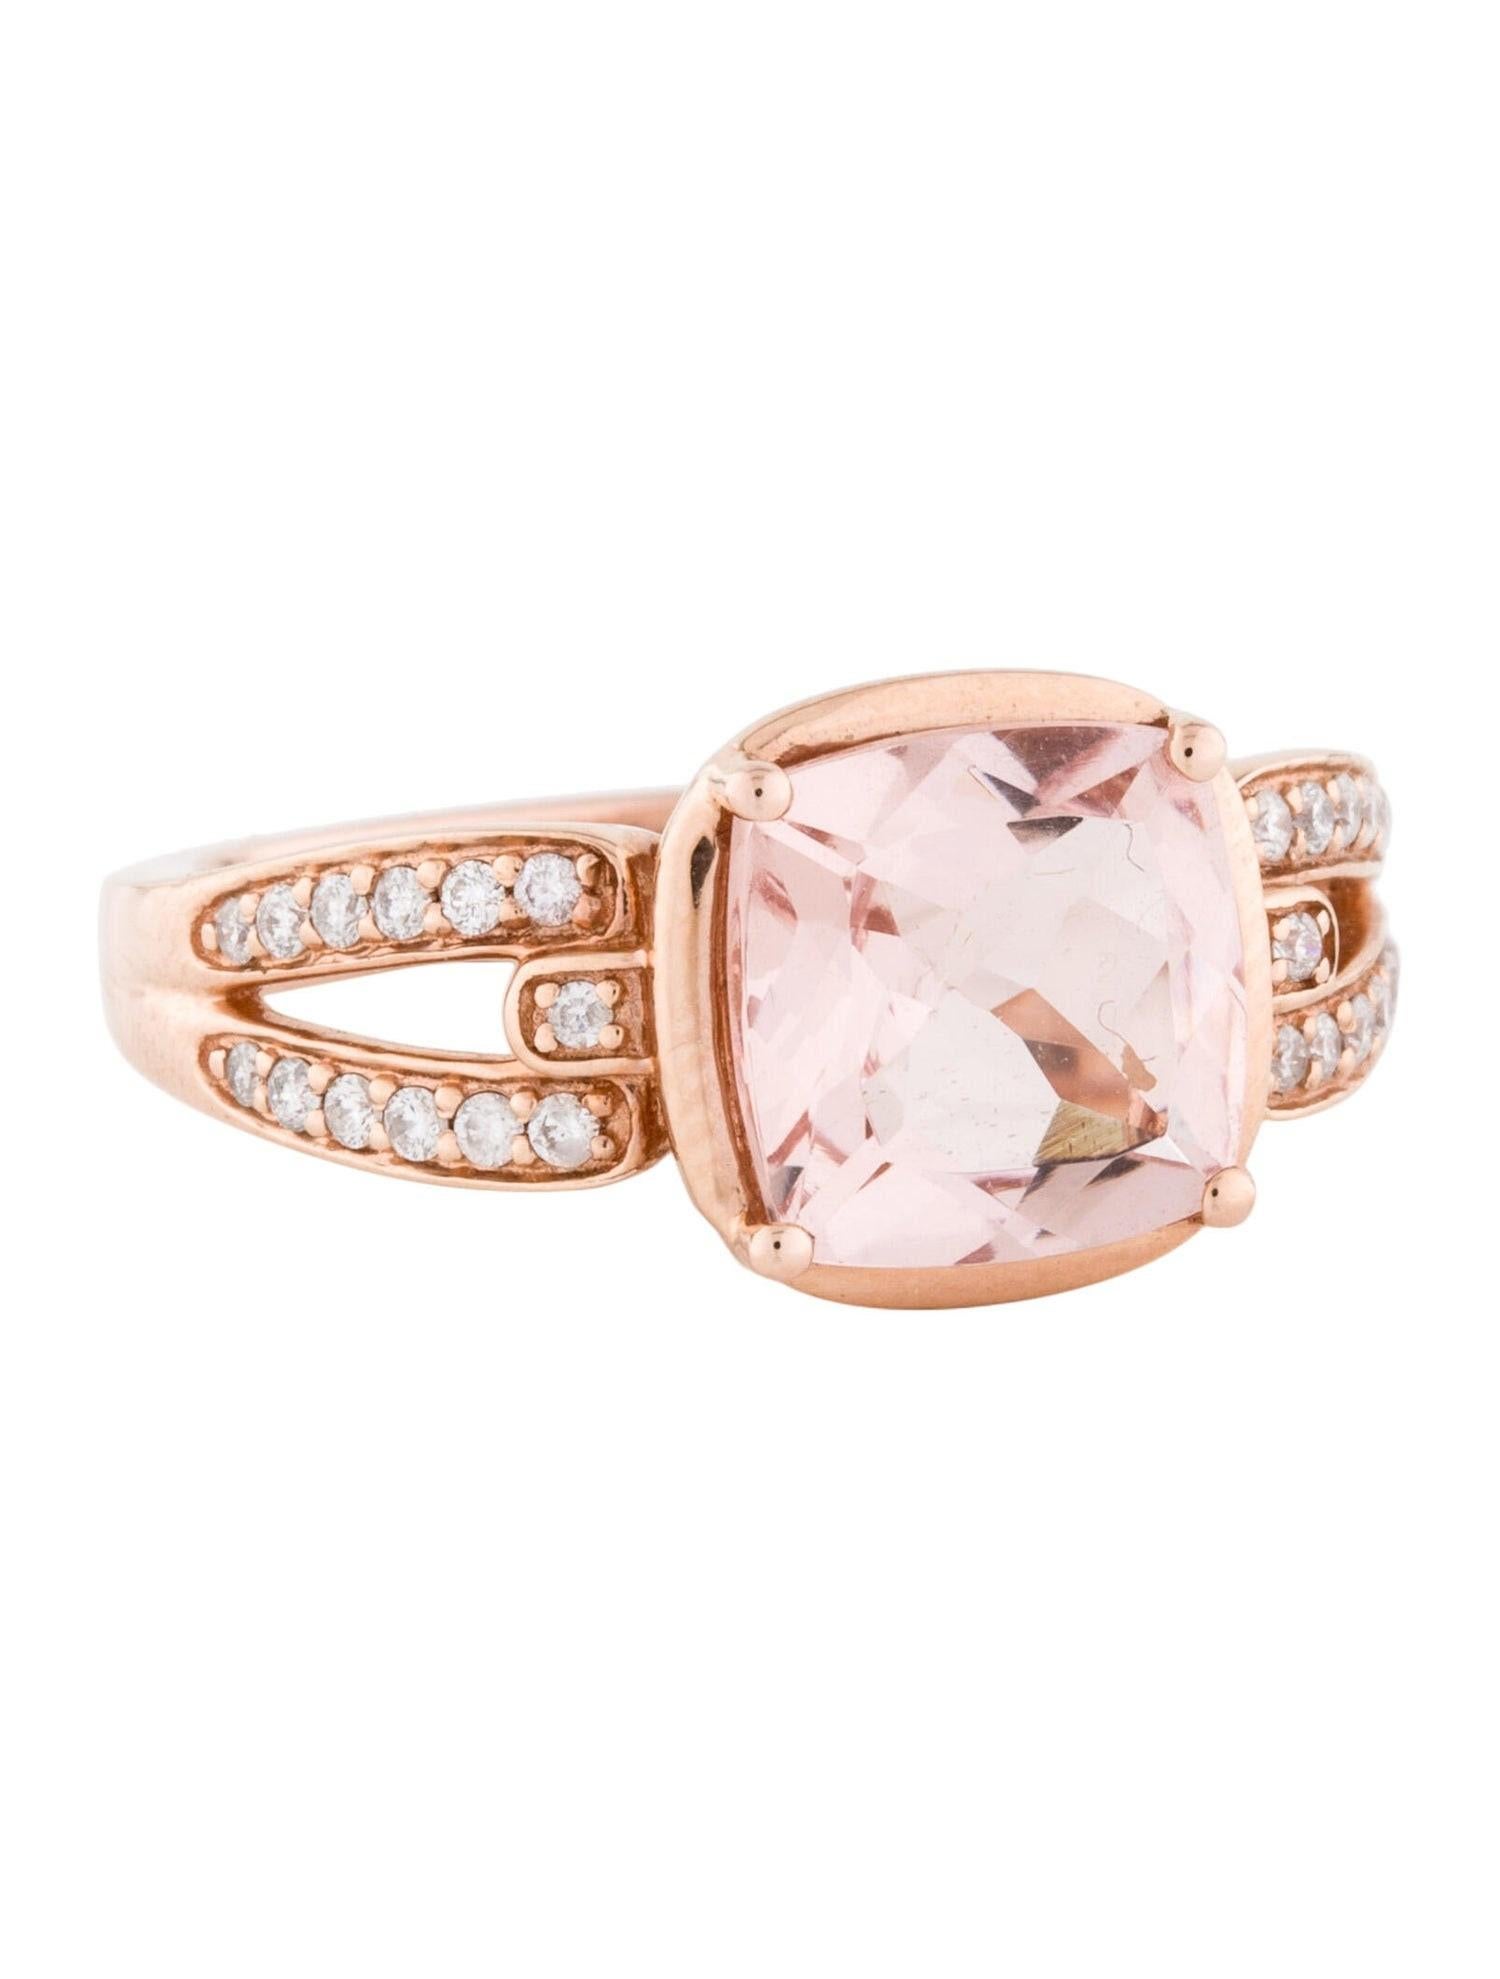 This is a delicate cushion-shaped natural morganite and diamond ring set in solid 14K rose gold. This ring features a stunning natural cushion-cut morganite stone with excellent clear color (AAA quality gem). This ring showcases 2.39 carat of AAA